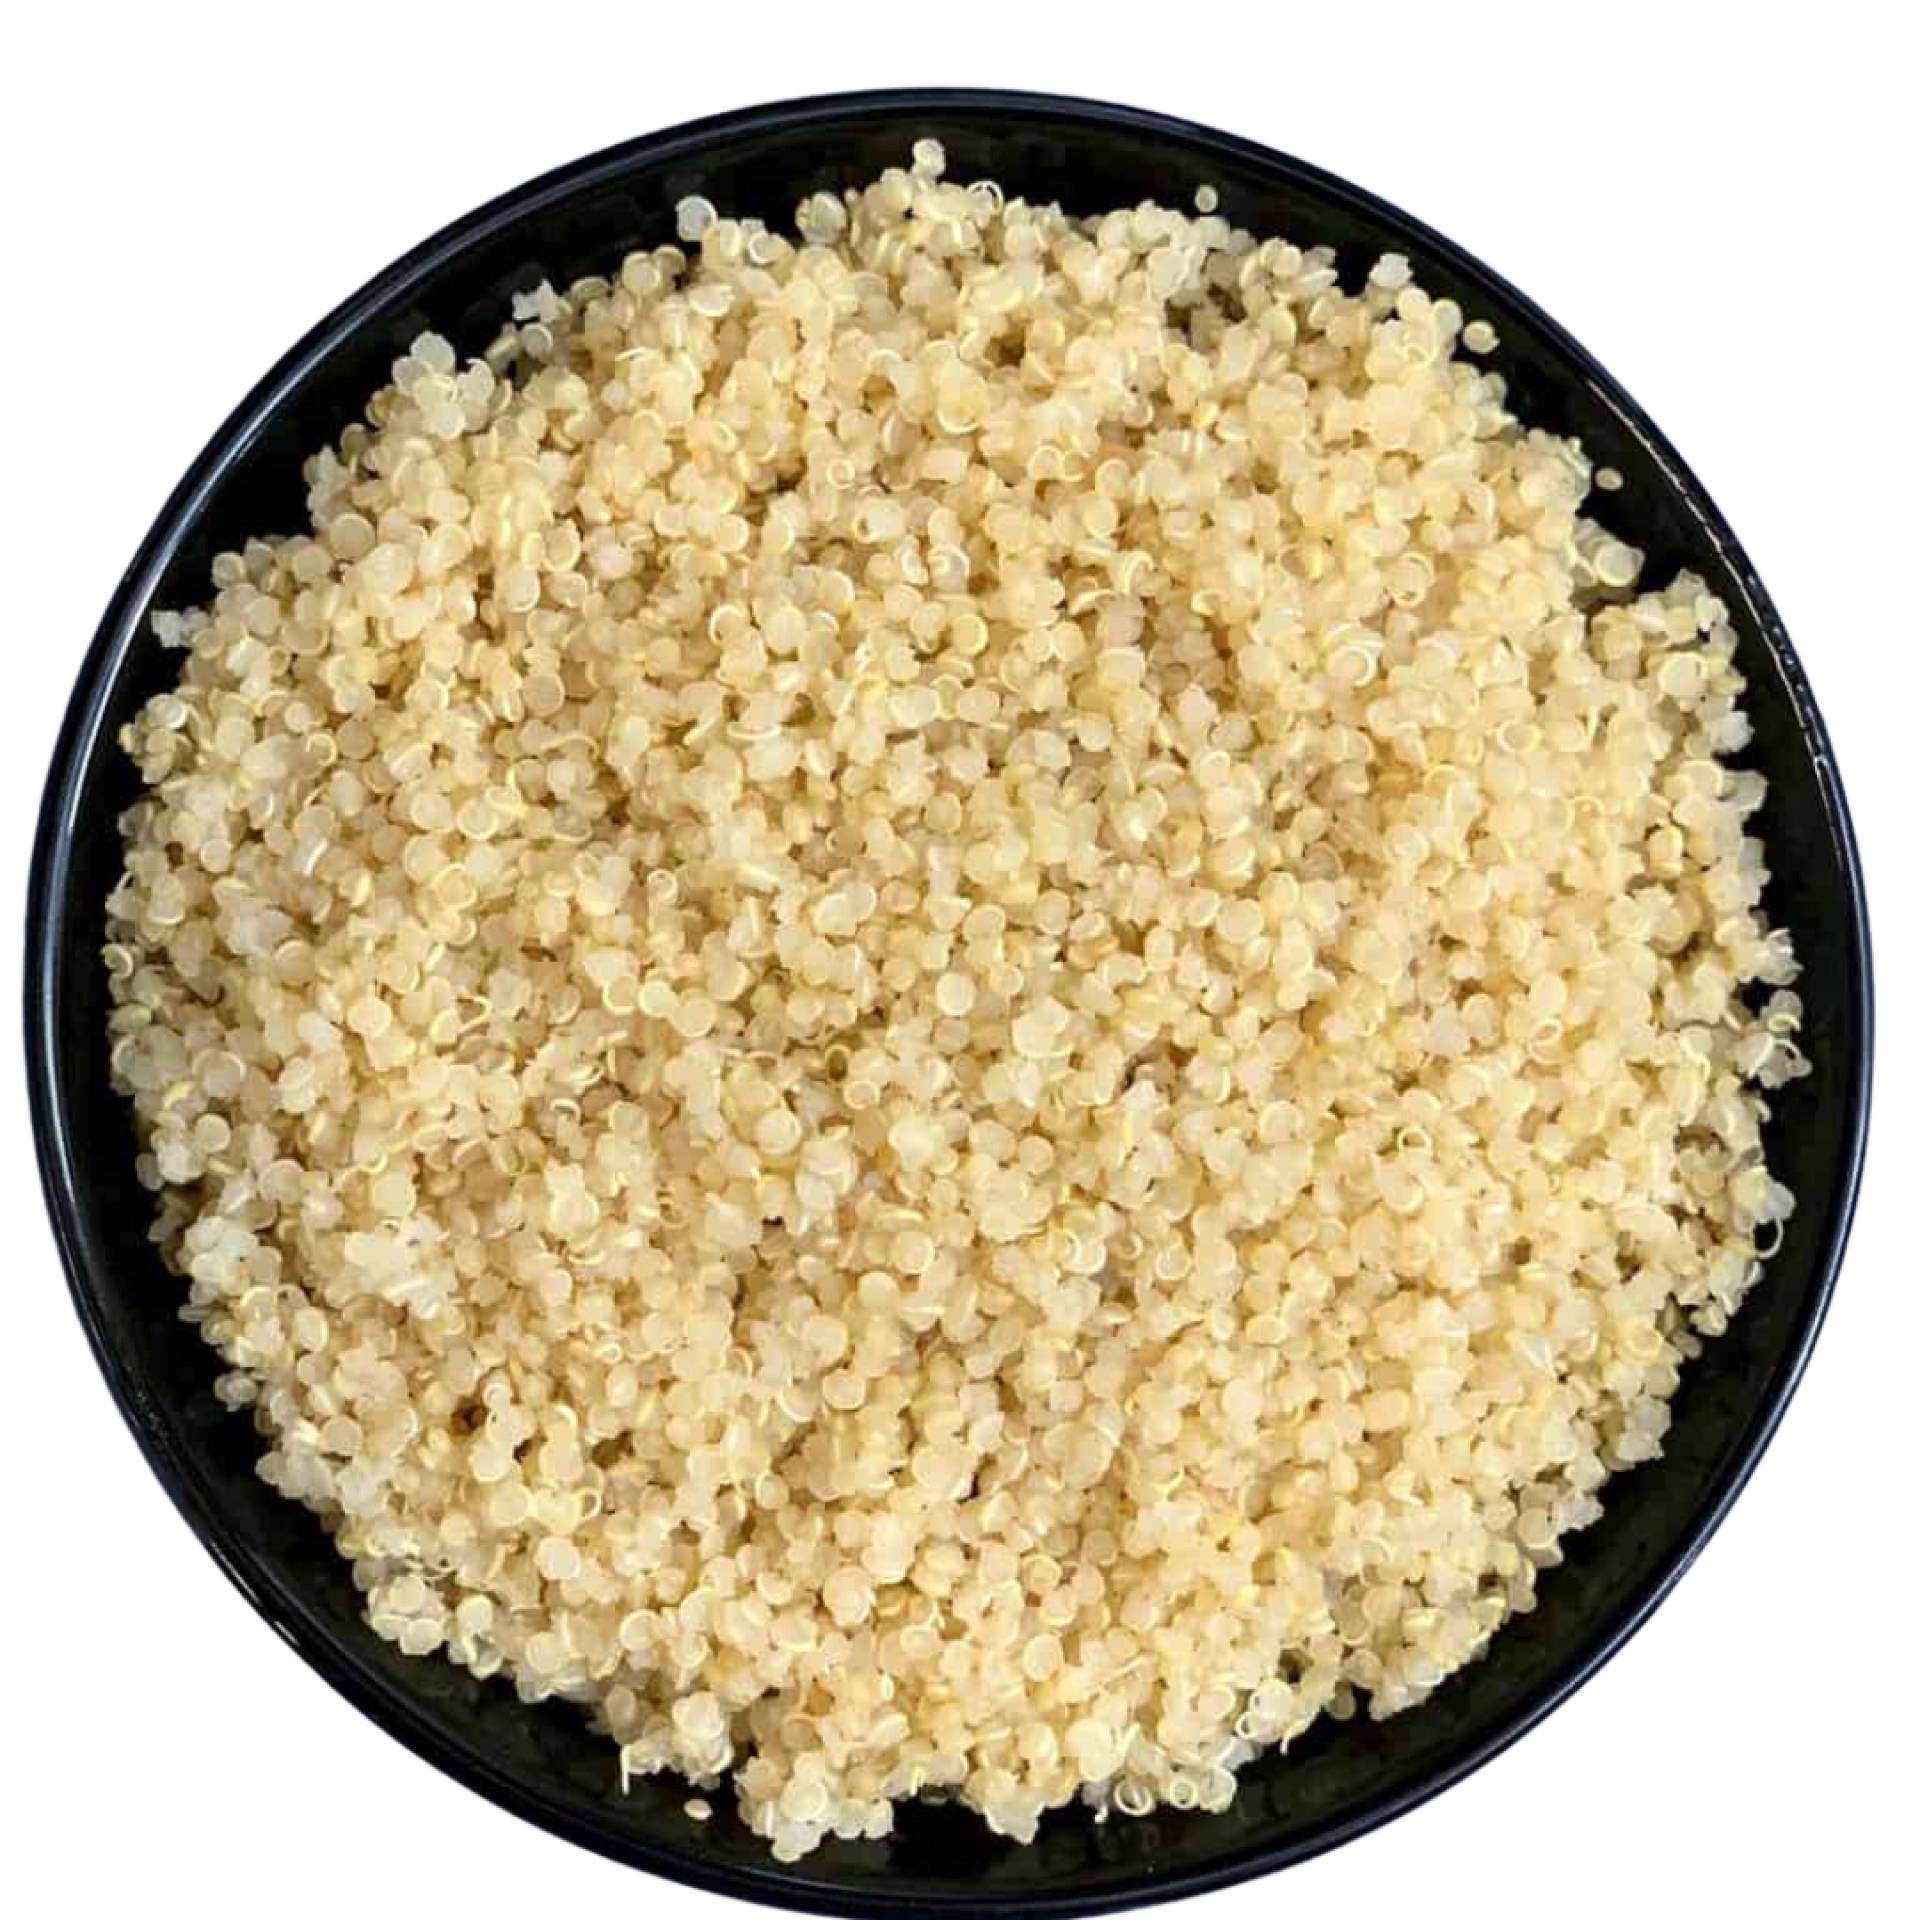 Quinoa Only - No Sauce (Ready to Heat)